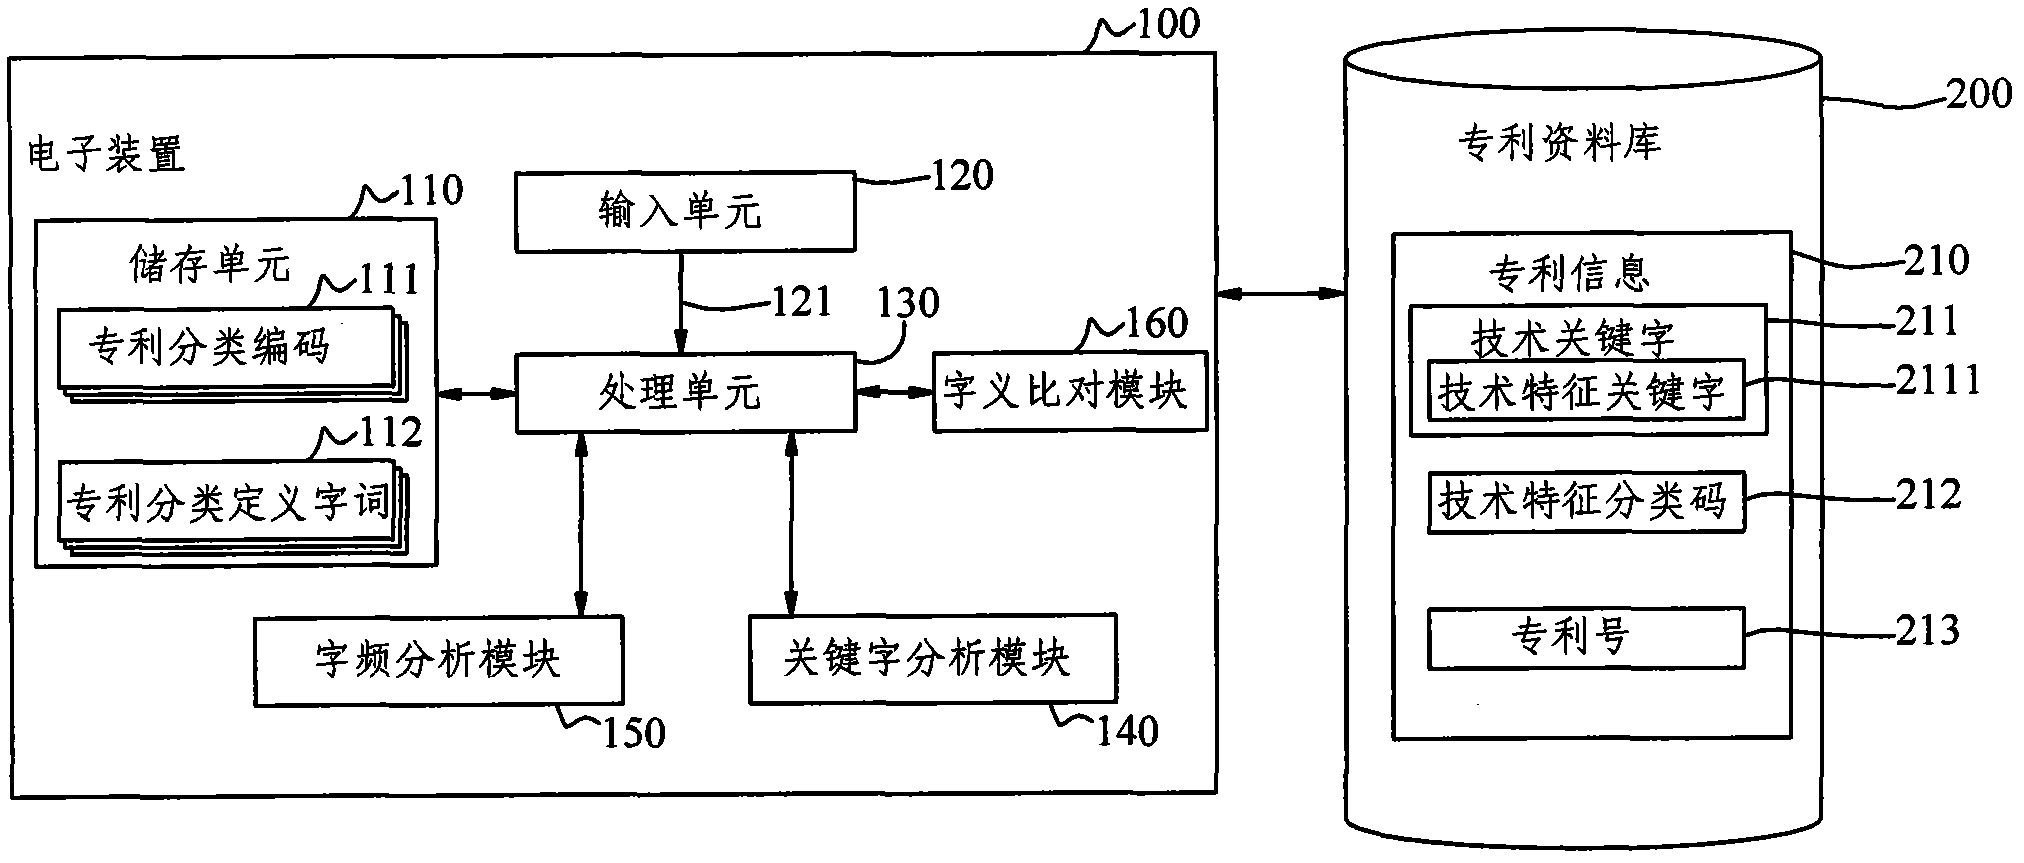 Computer assistant patent automatic sorting method and system